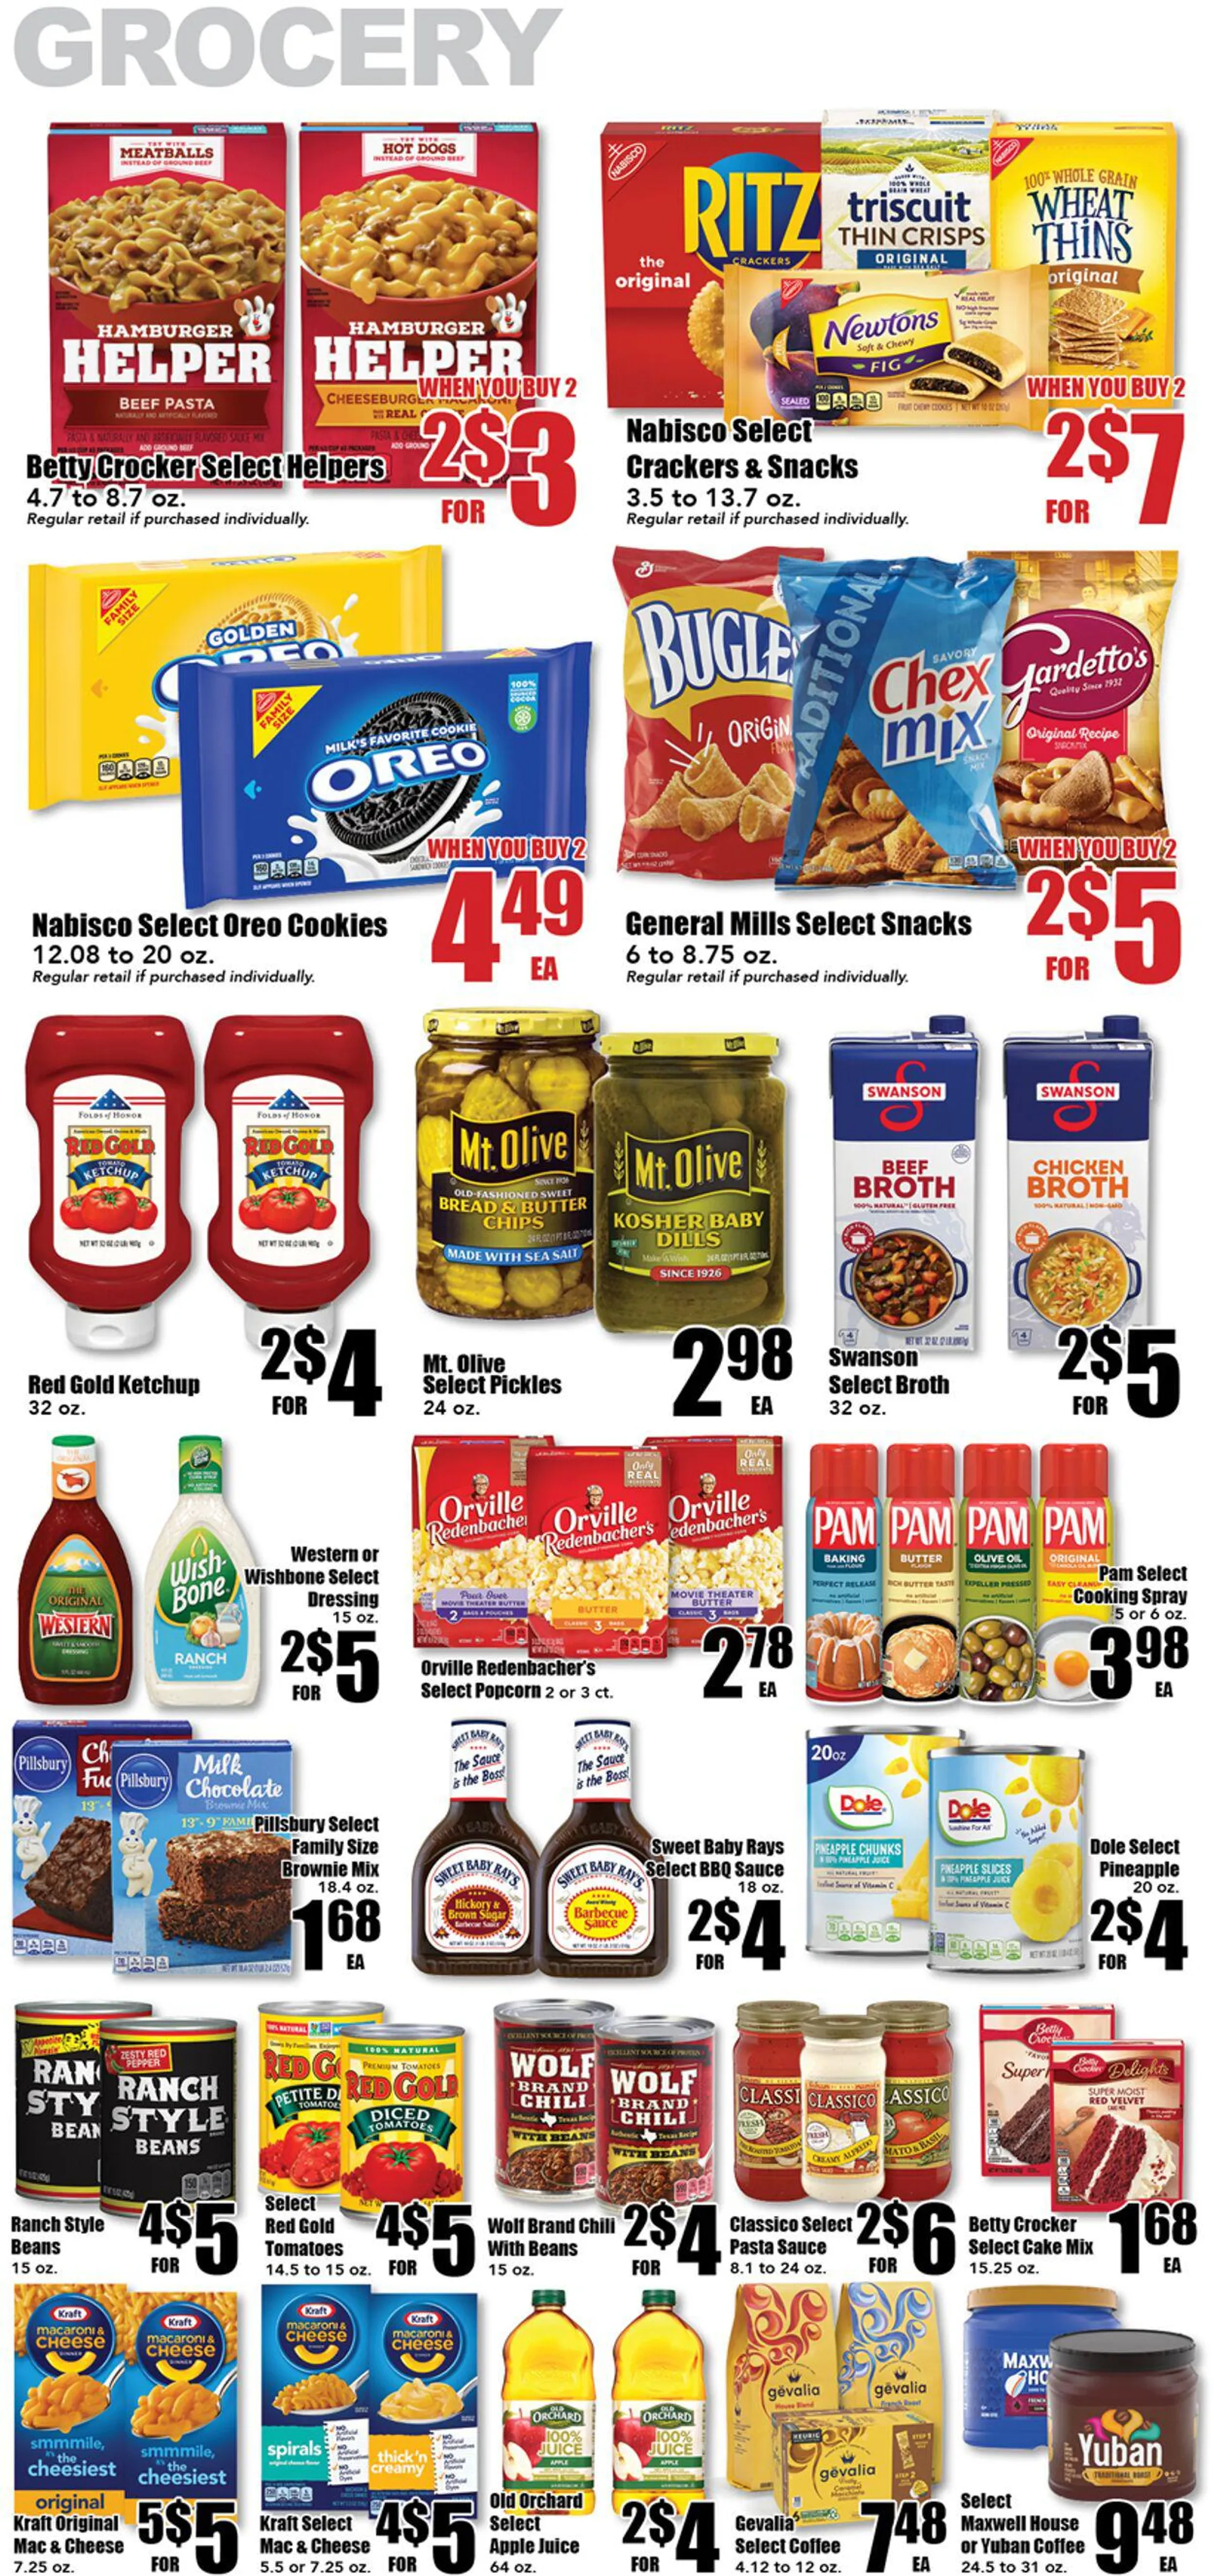 Warehouse Market Current weekly ad - 2